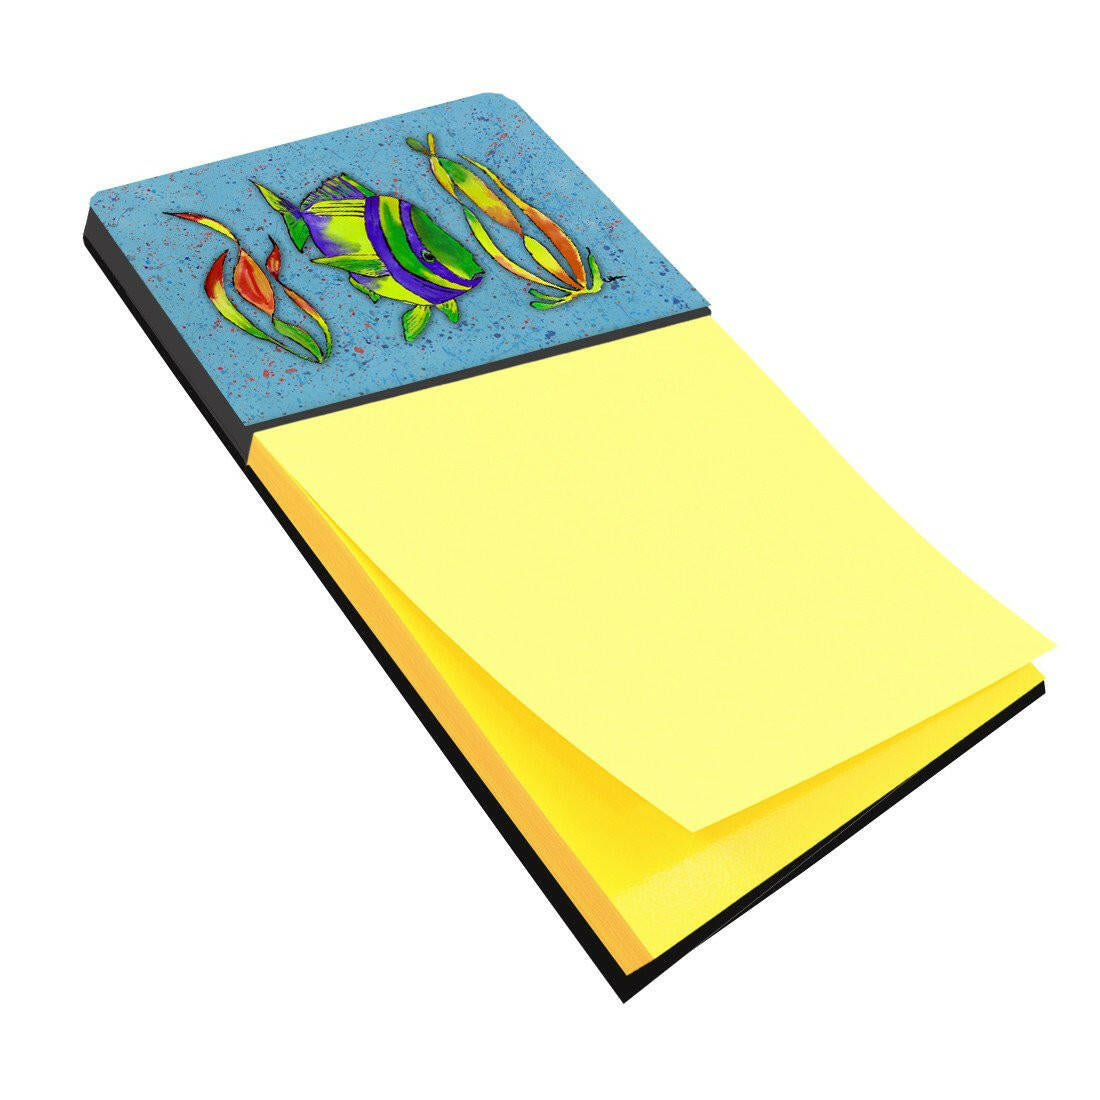 Tropical Fish on Blue Refiillable Sticky Note Holder or Postit Note Dispenser 8570SN by Caroline's Treasures